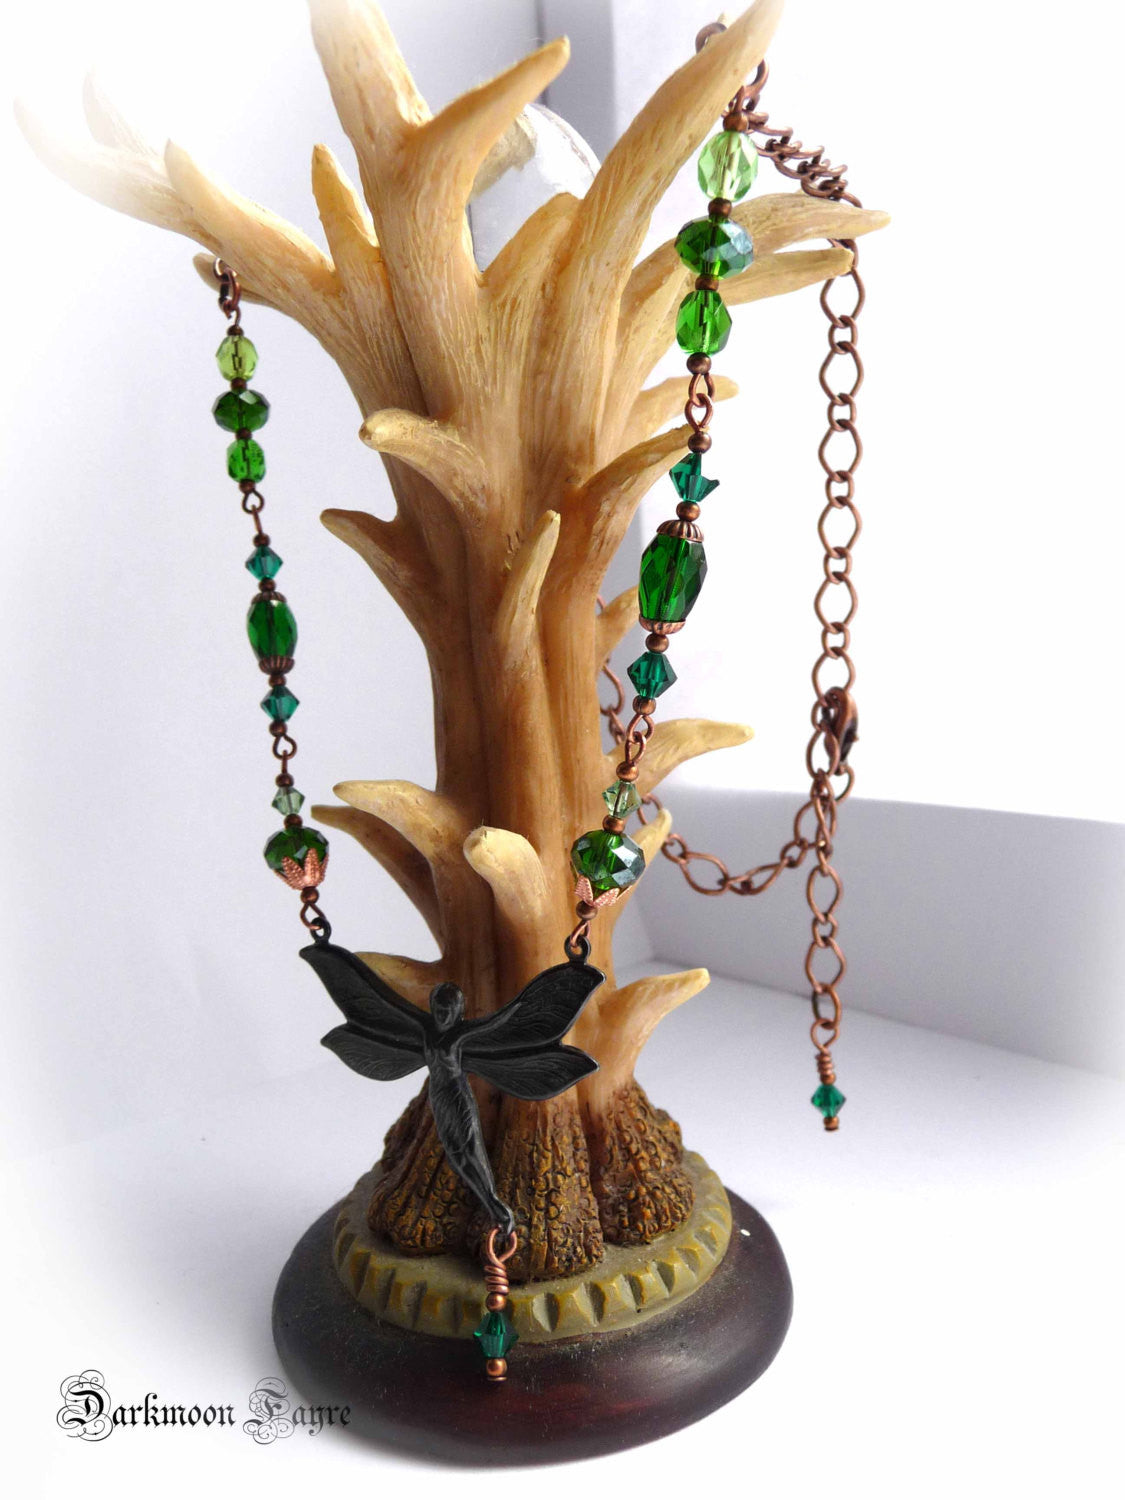 Absinthe Fairy Necklace. Ombré Green Fire Polished Czech Glass, Swarovski Crystals, Antiqued Copper. - Darkmoon Fayre